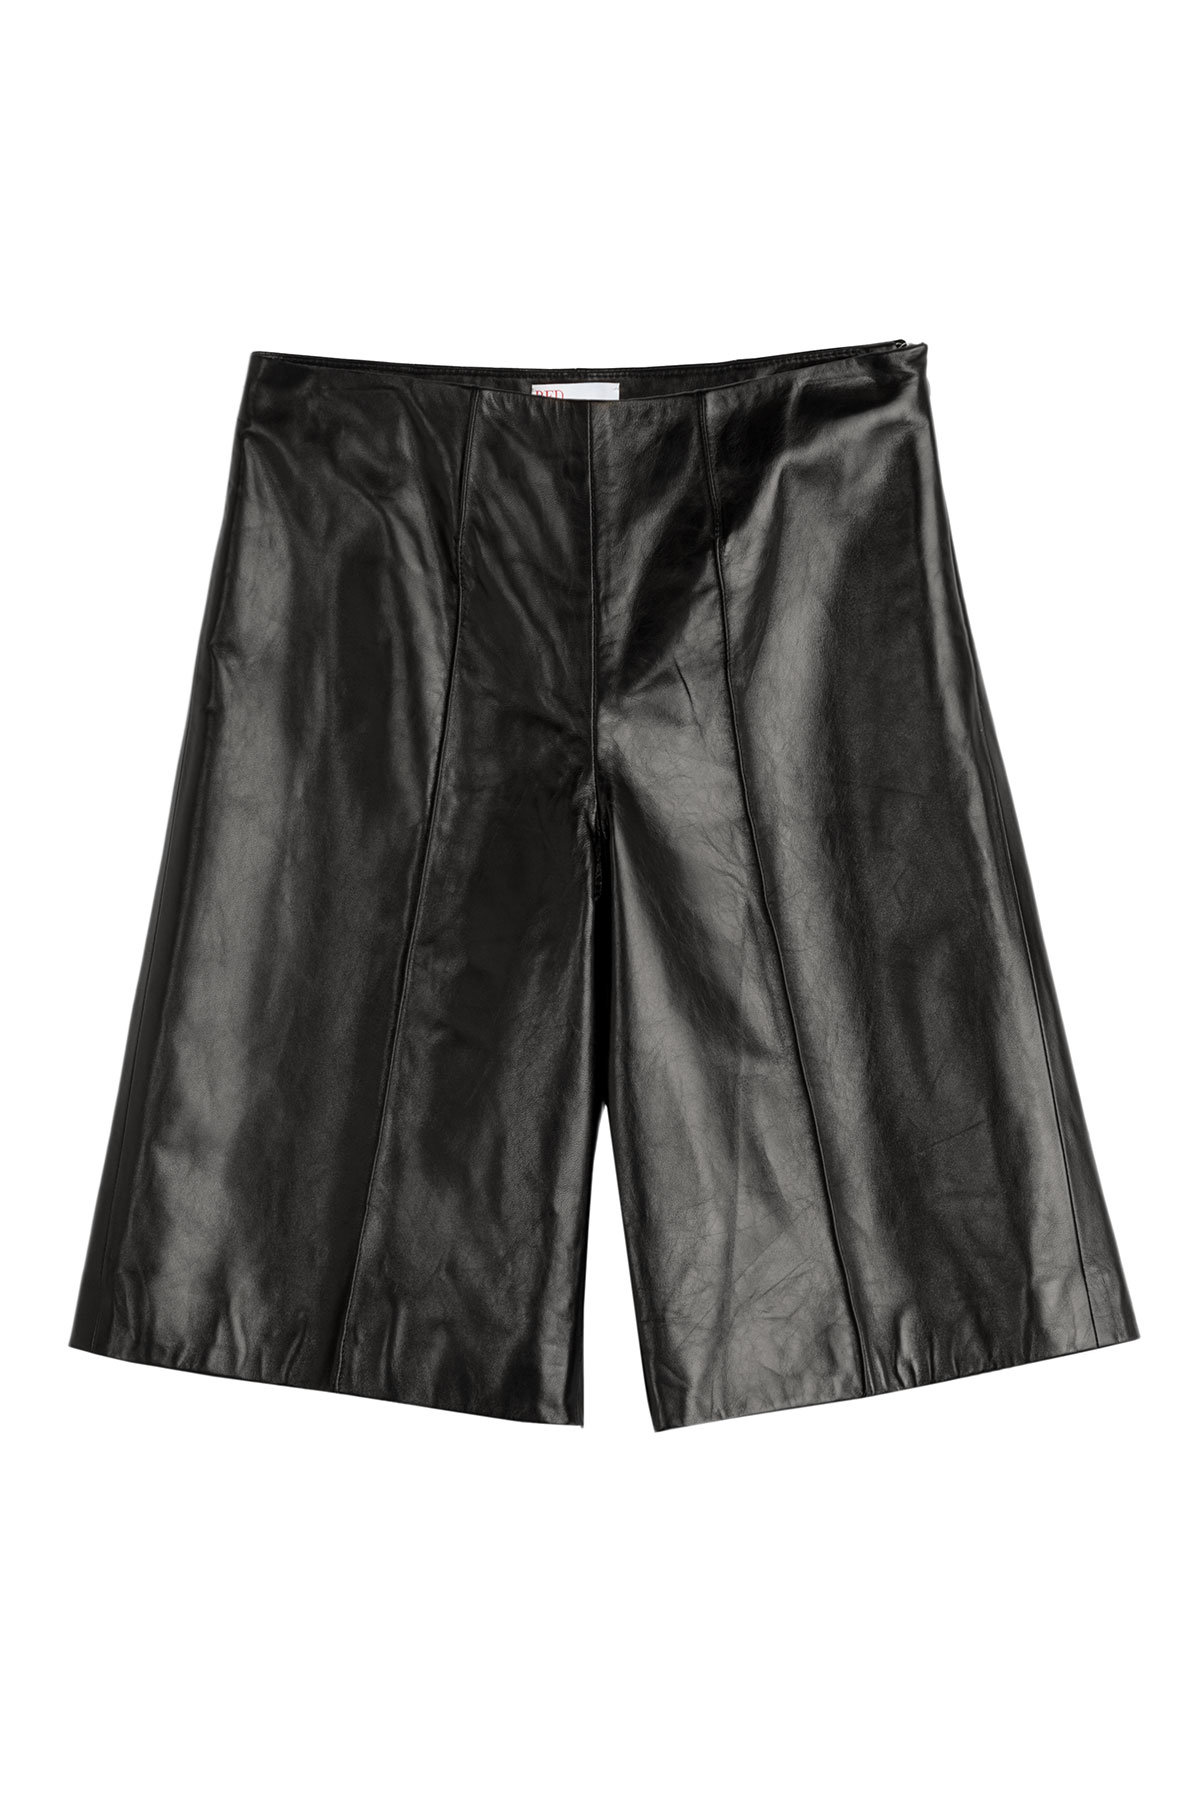 Red Valentino - Leather Culottes